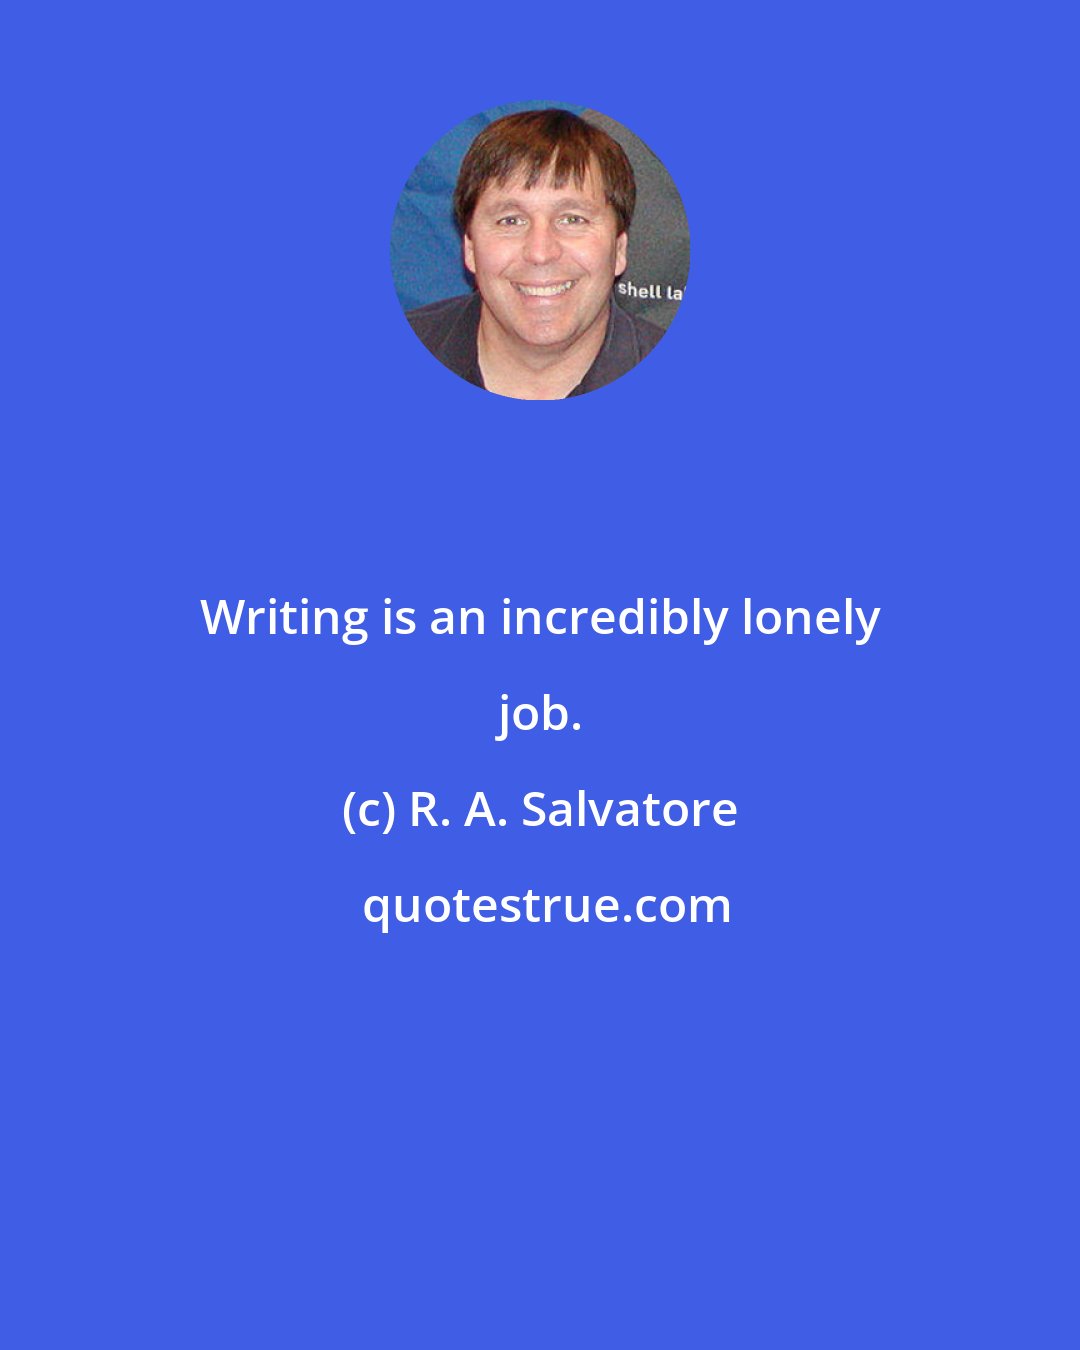 R. A. Salvatore: Writing is an incredibly lonely job.